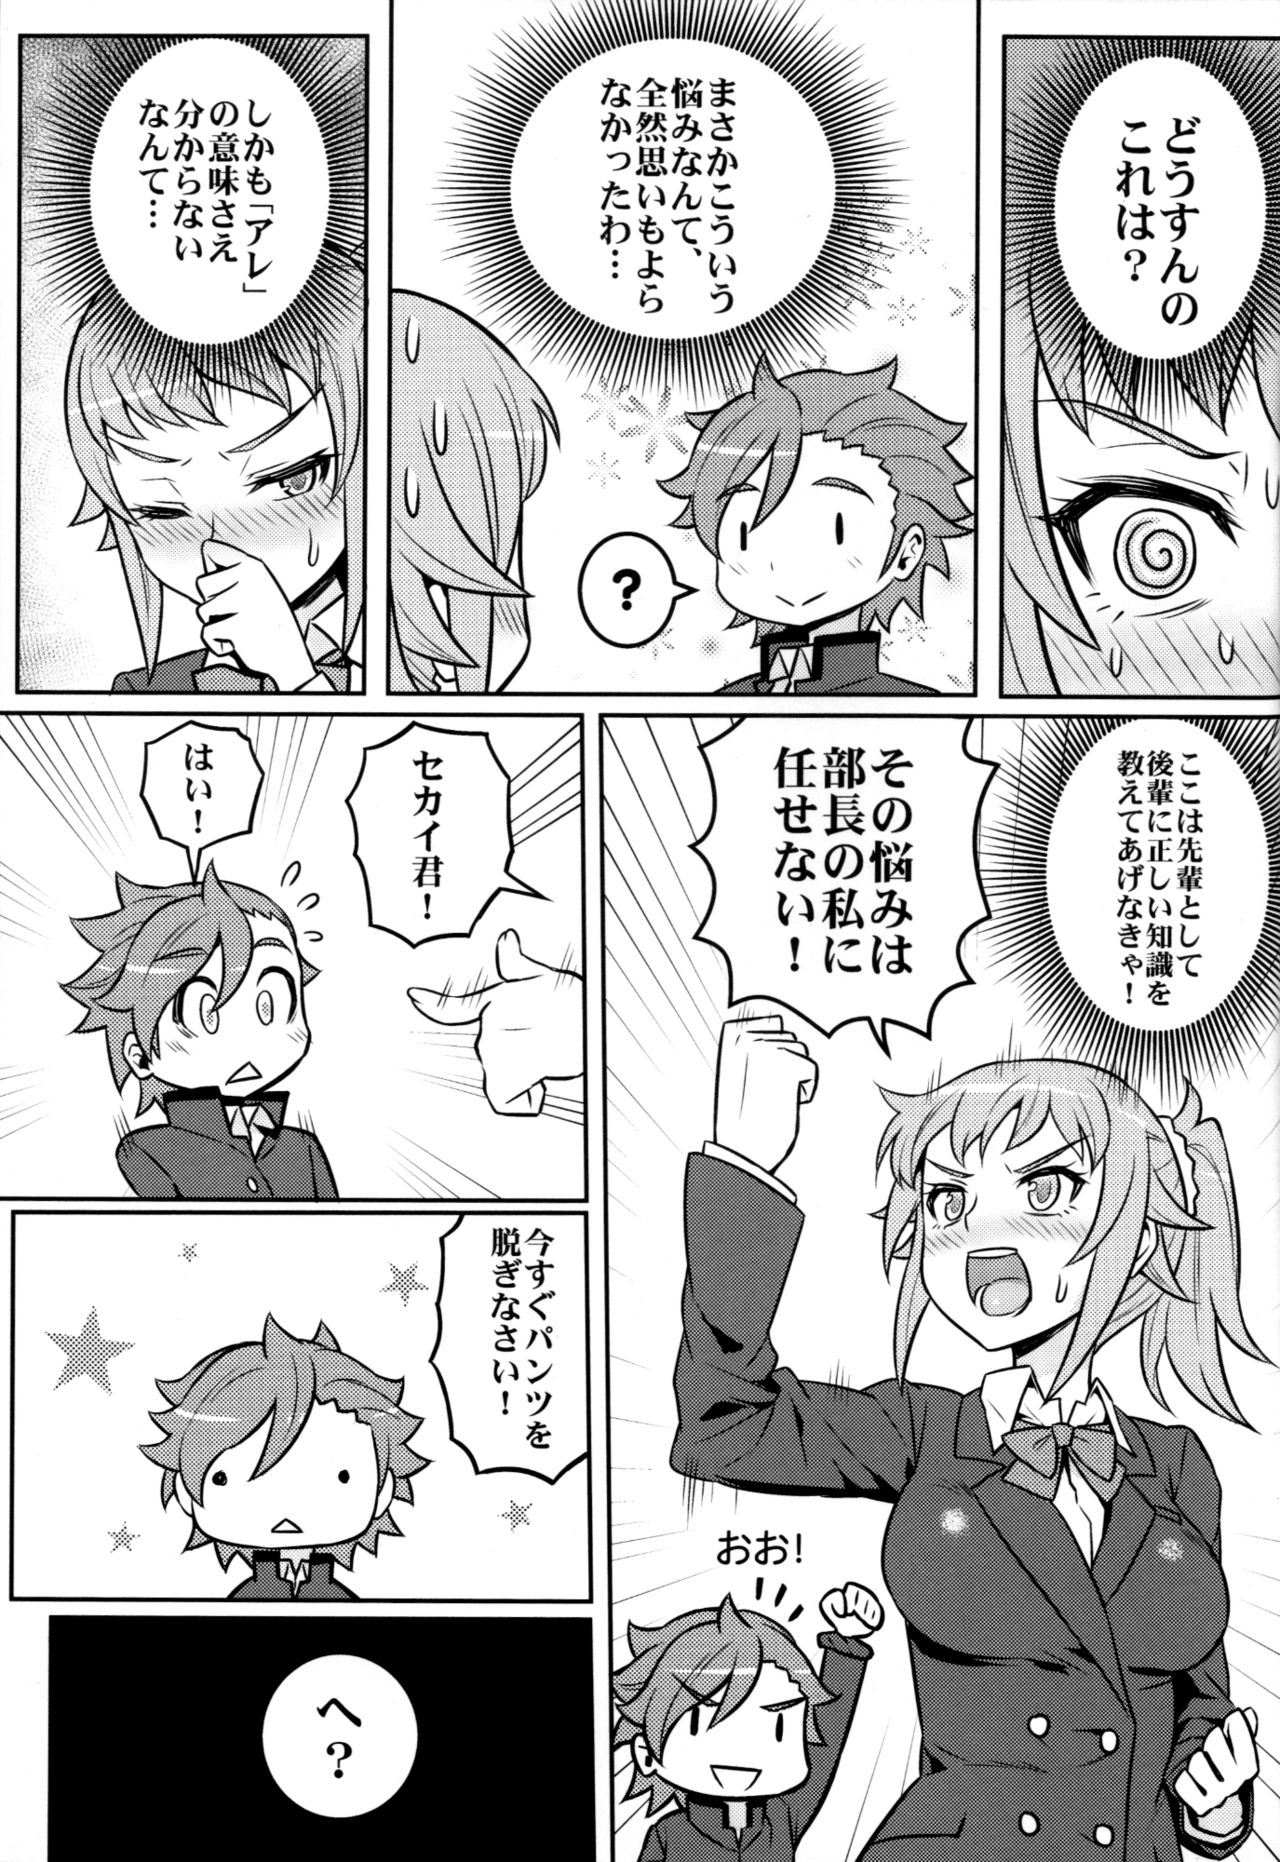 (C87) [Green Ketchup (Zhen Lu)] Nayamashii Fighters (Gundam Build Fighters Try) page 6 full